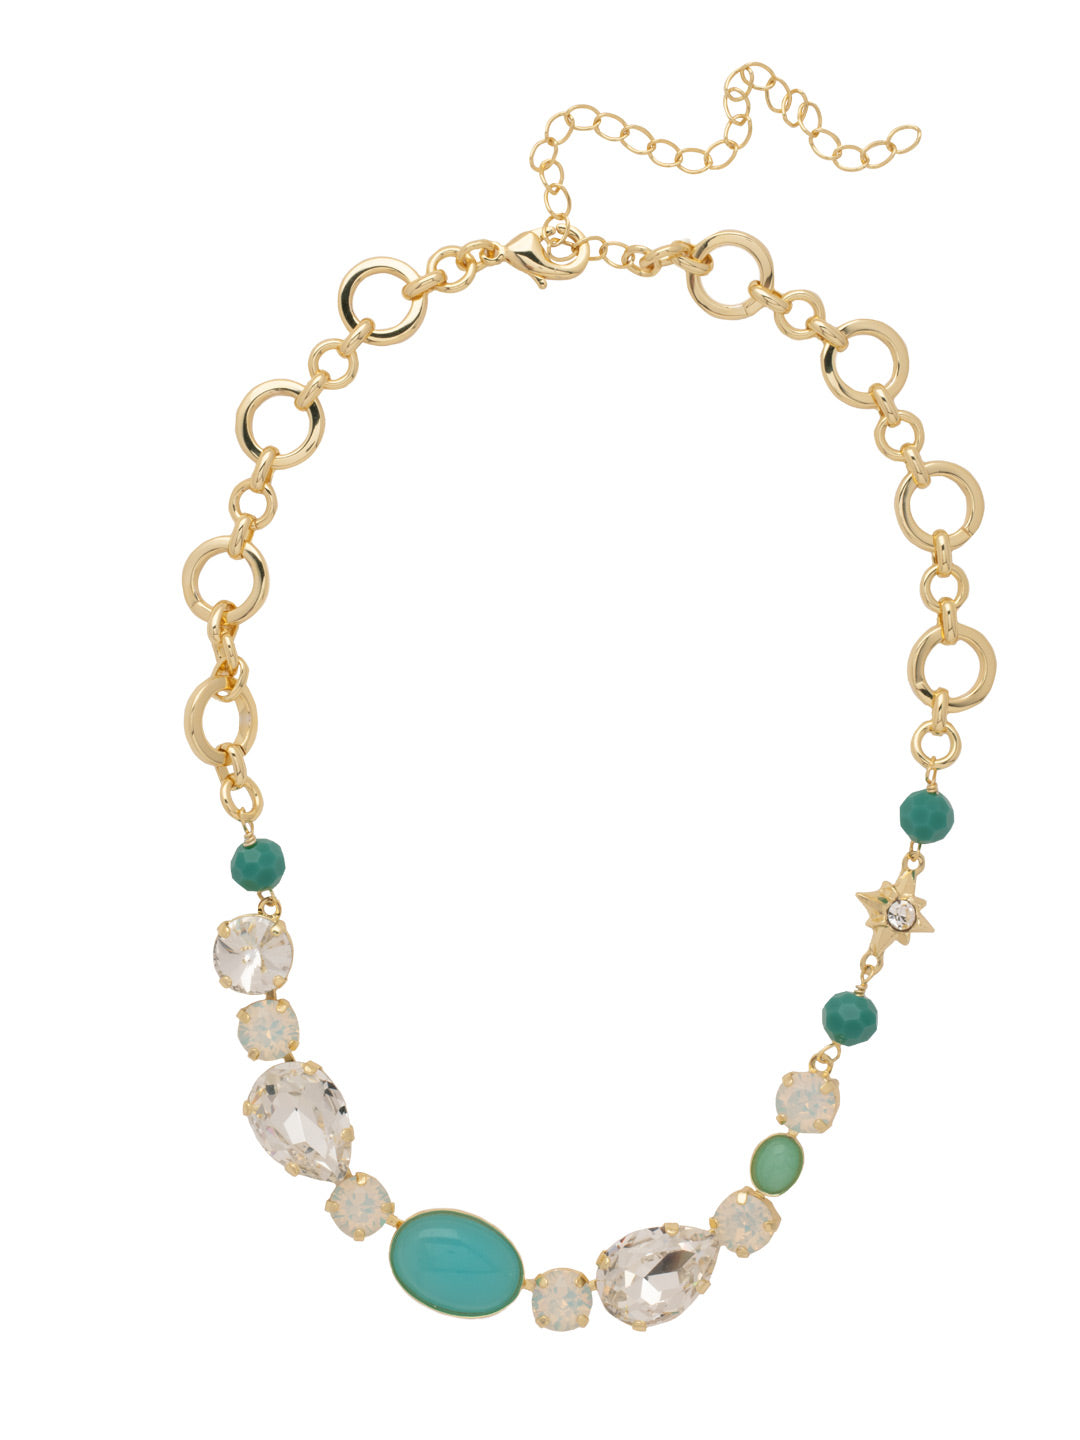 Pixie Chunky Tennis Necklace - 4NFF46BGAES - <p>The Pixie Chunky Tennis Necklace features ring chains, semi-precious beads, various crystals, and semi-precious crystals. From Sorrelli's Aegean Sea collection in our Bright Gold-tone finish.</p>